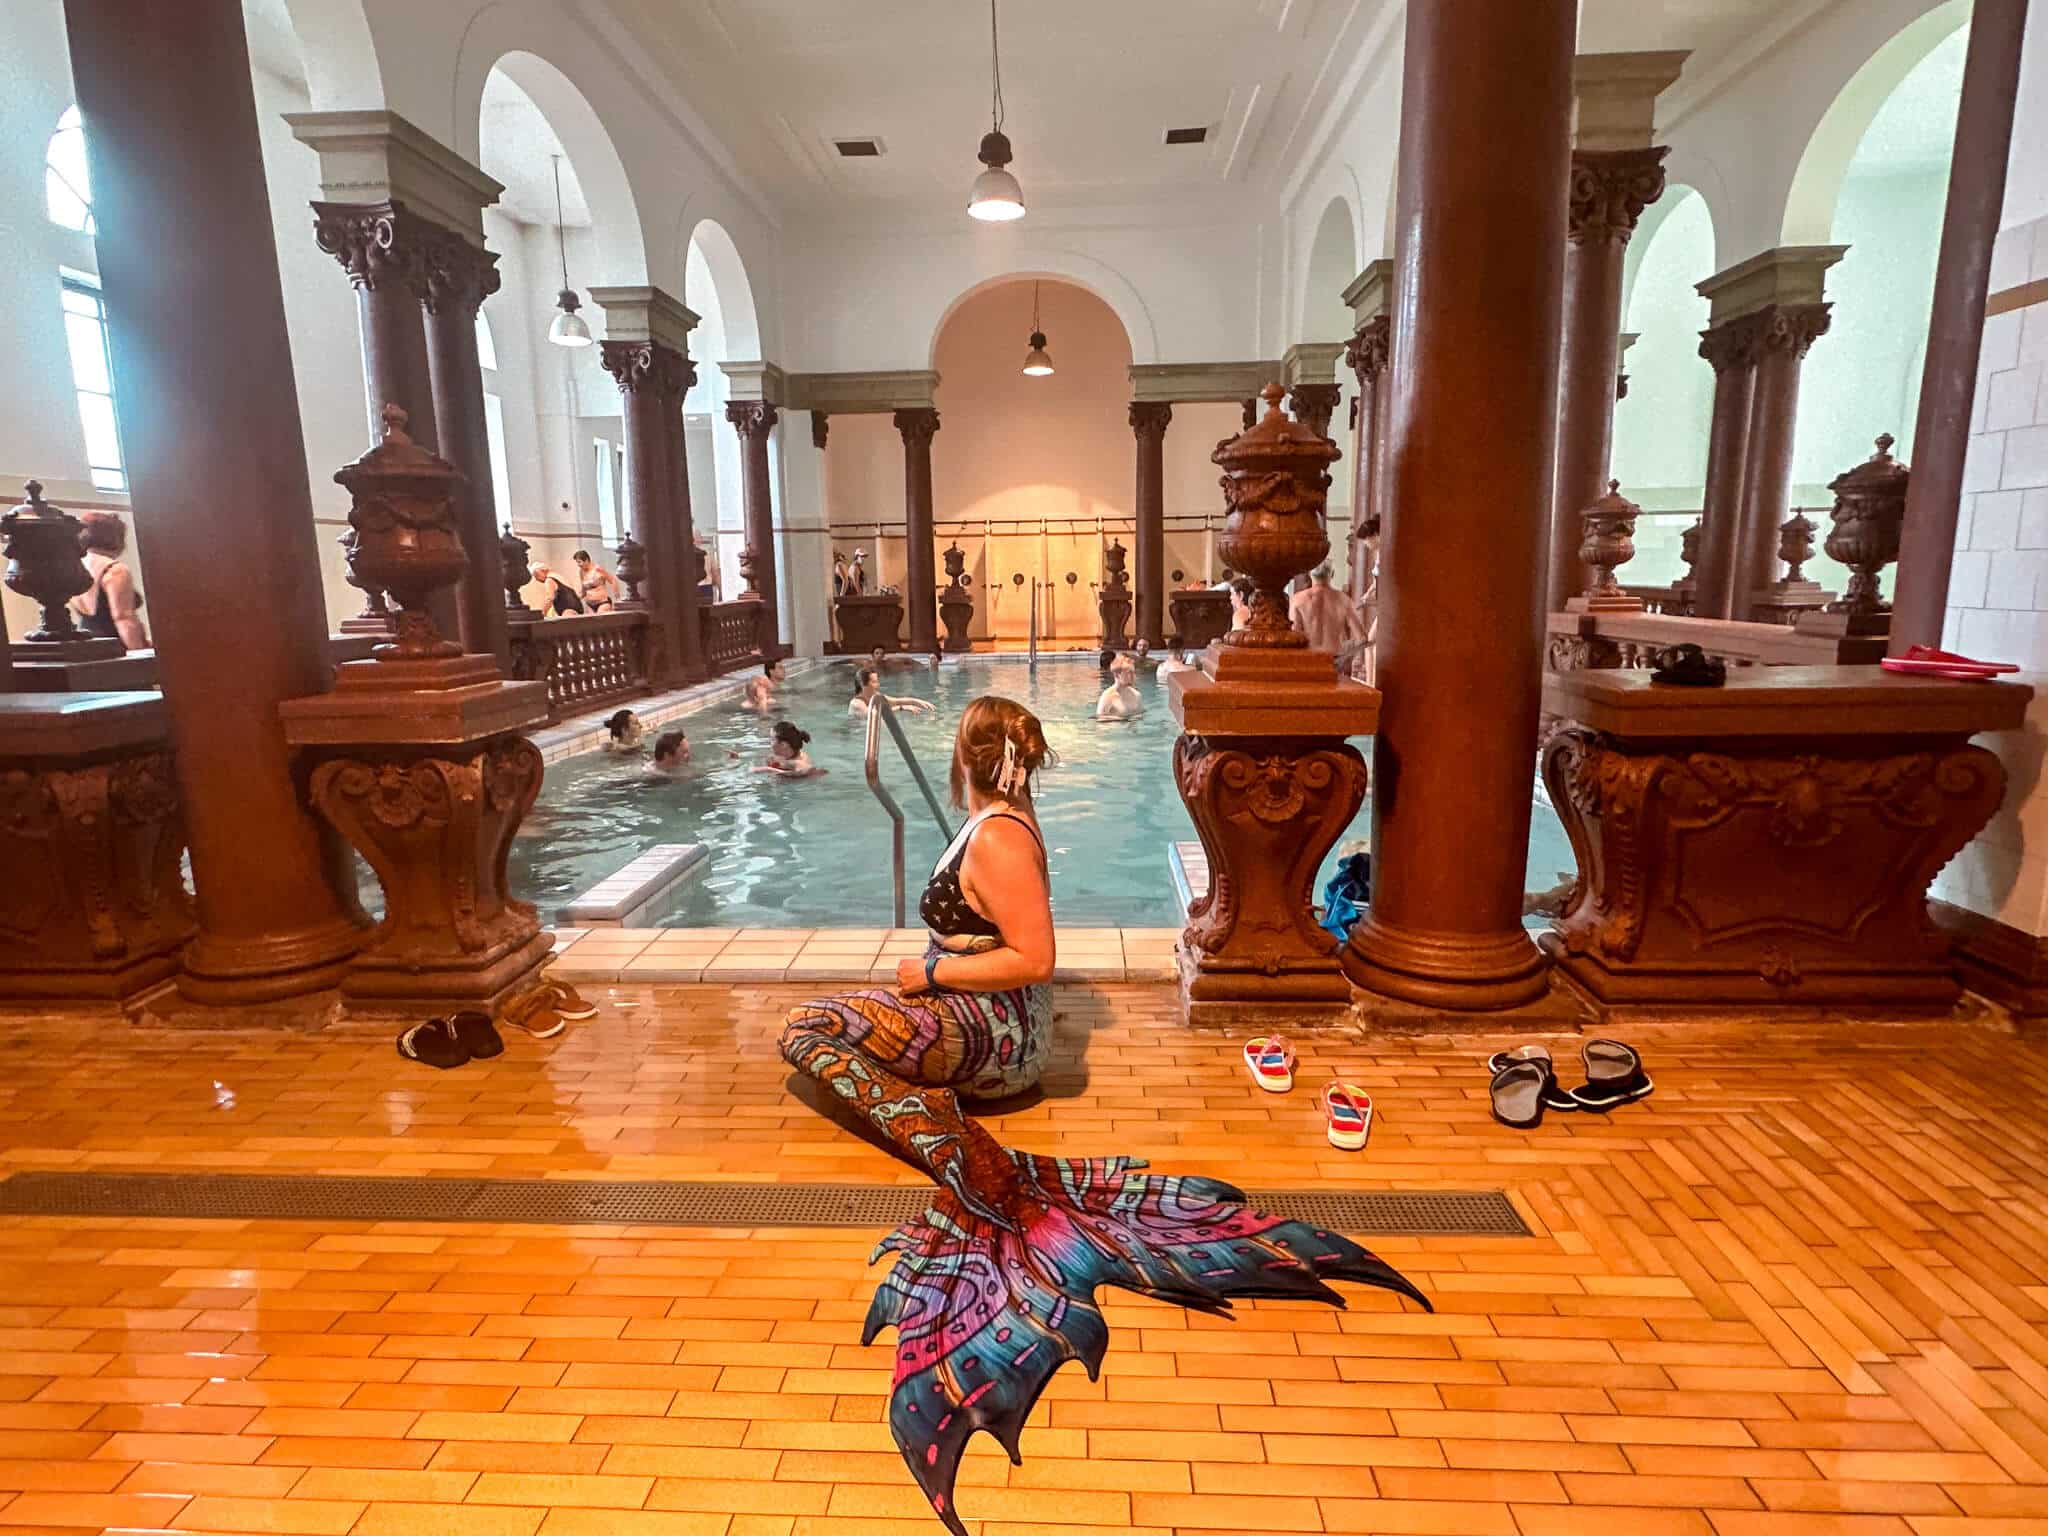 Mermaid in the interior of Szechenyi Spa in Budapest